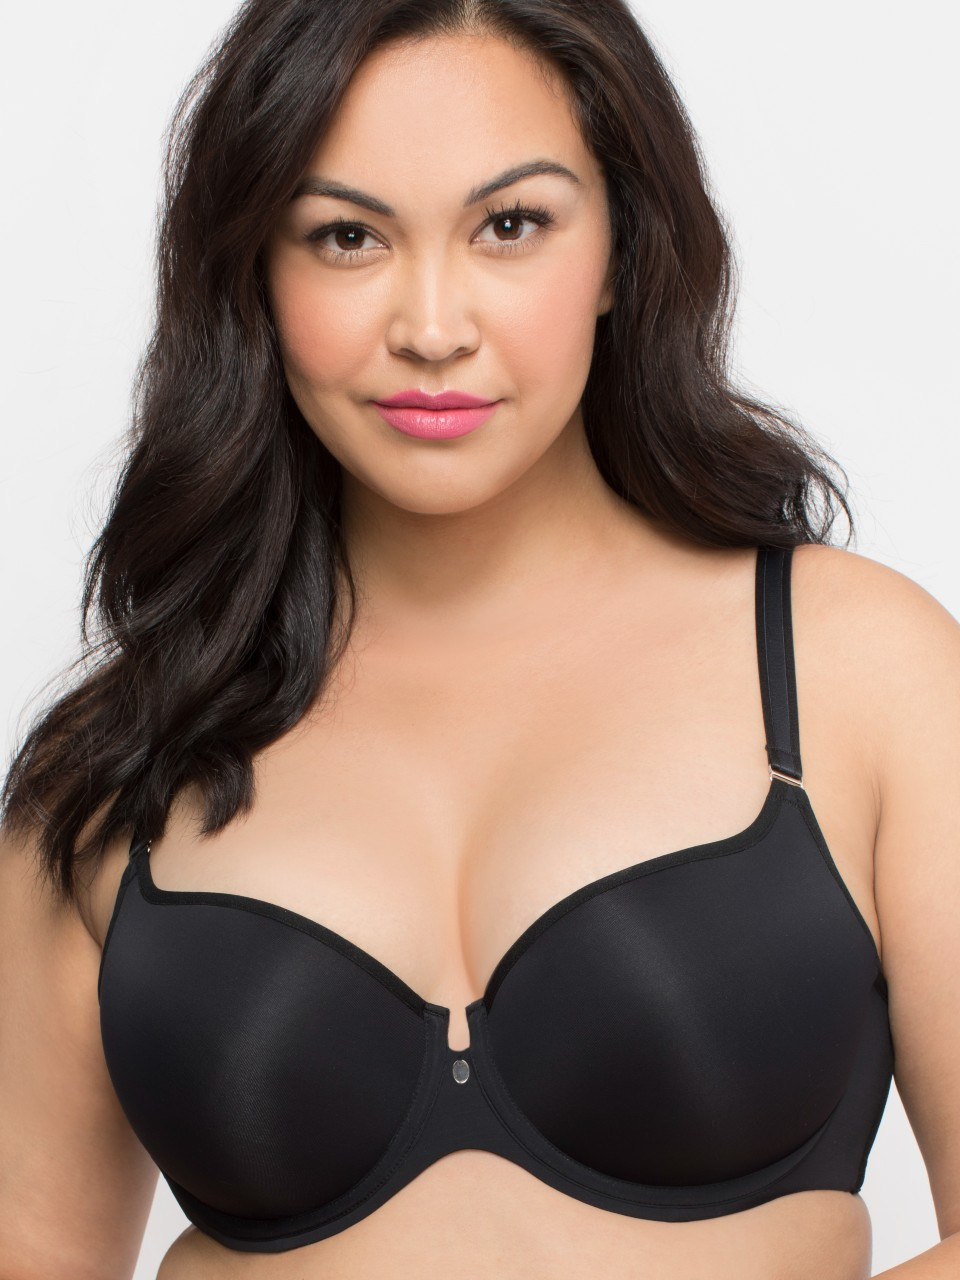 Curvy Couture Flawless Lace Side Smoother Bra 1172 Black US Sizes C thru H  NWT